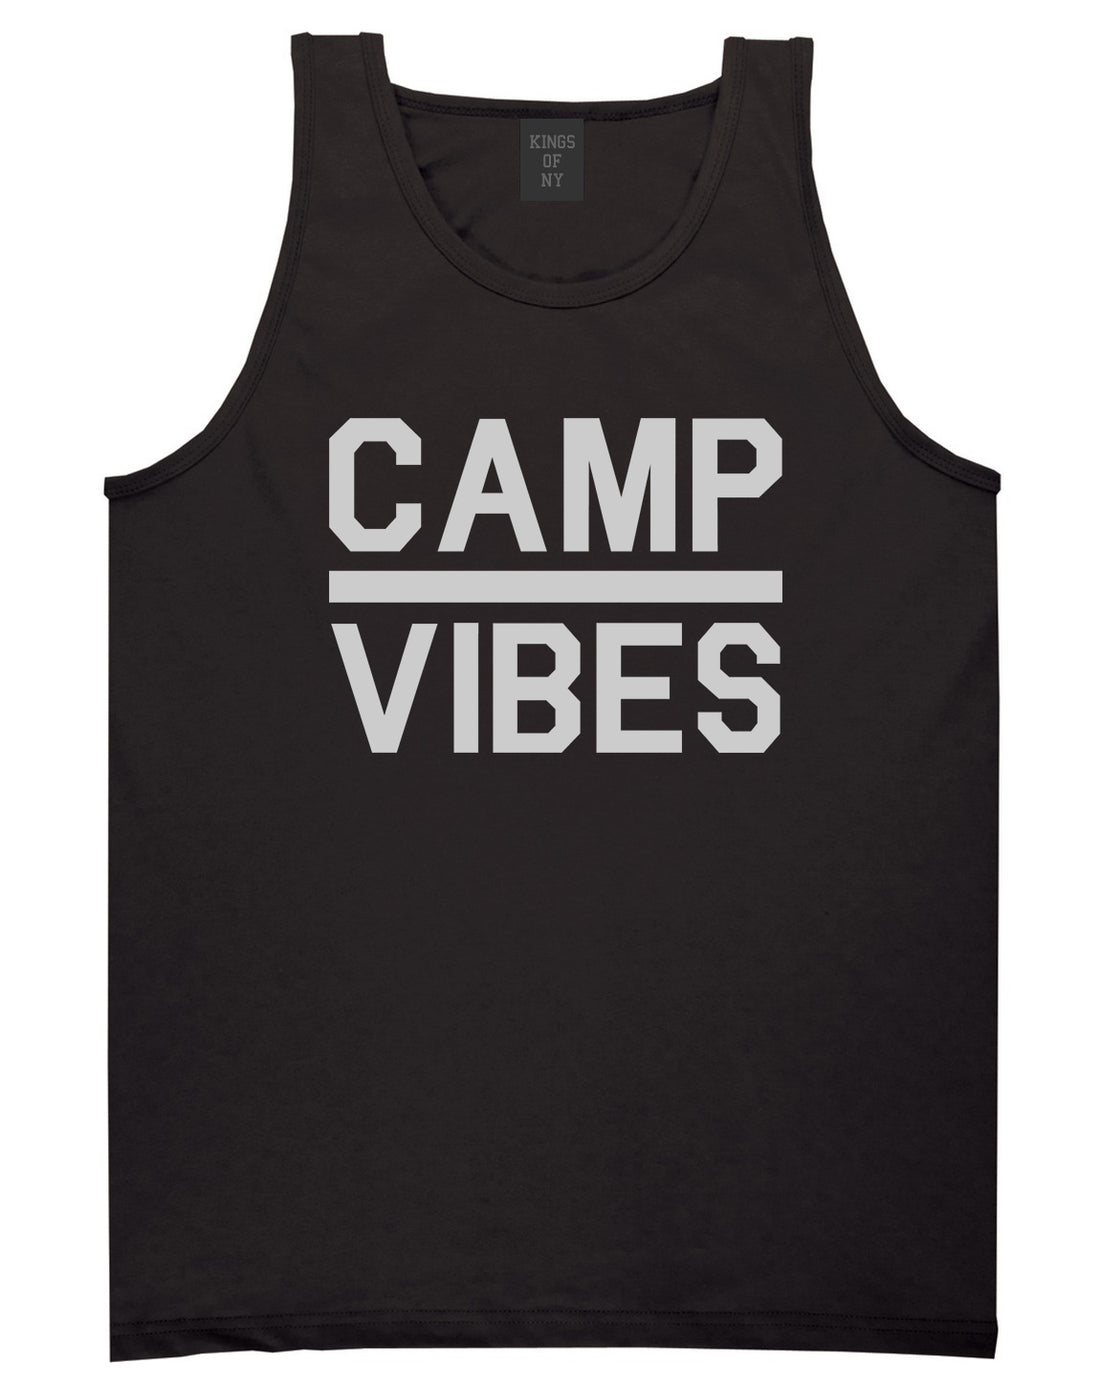 Camp Vibes Black Tank Top Shirt by Kings Of NY